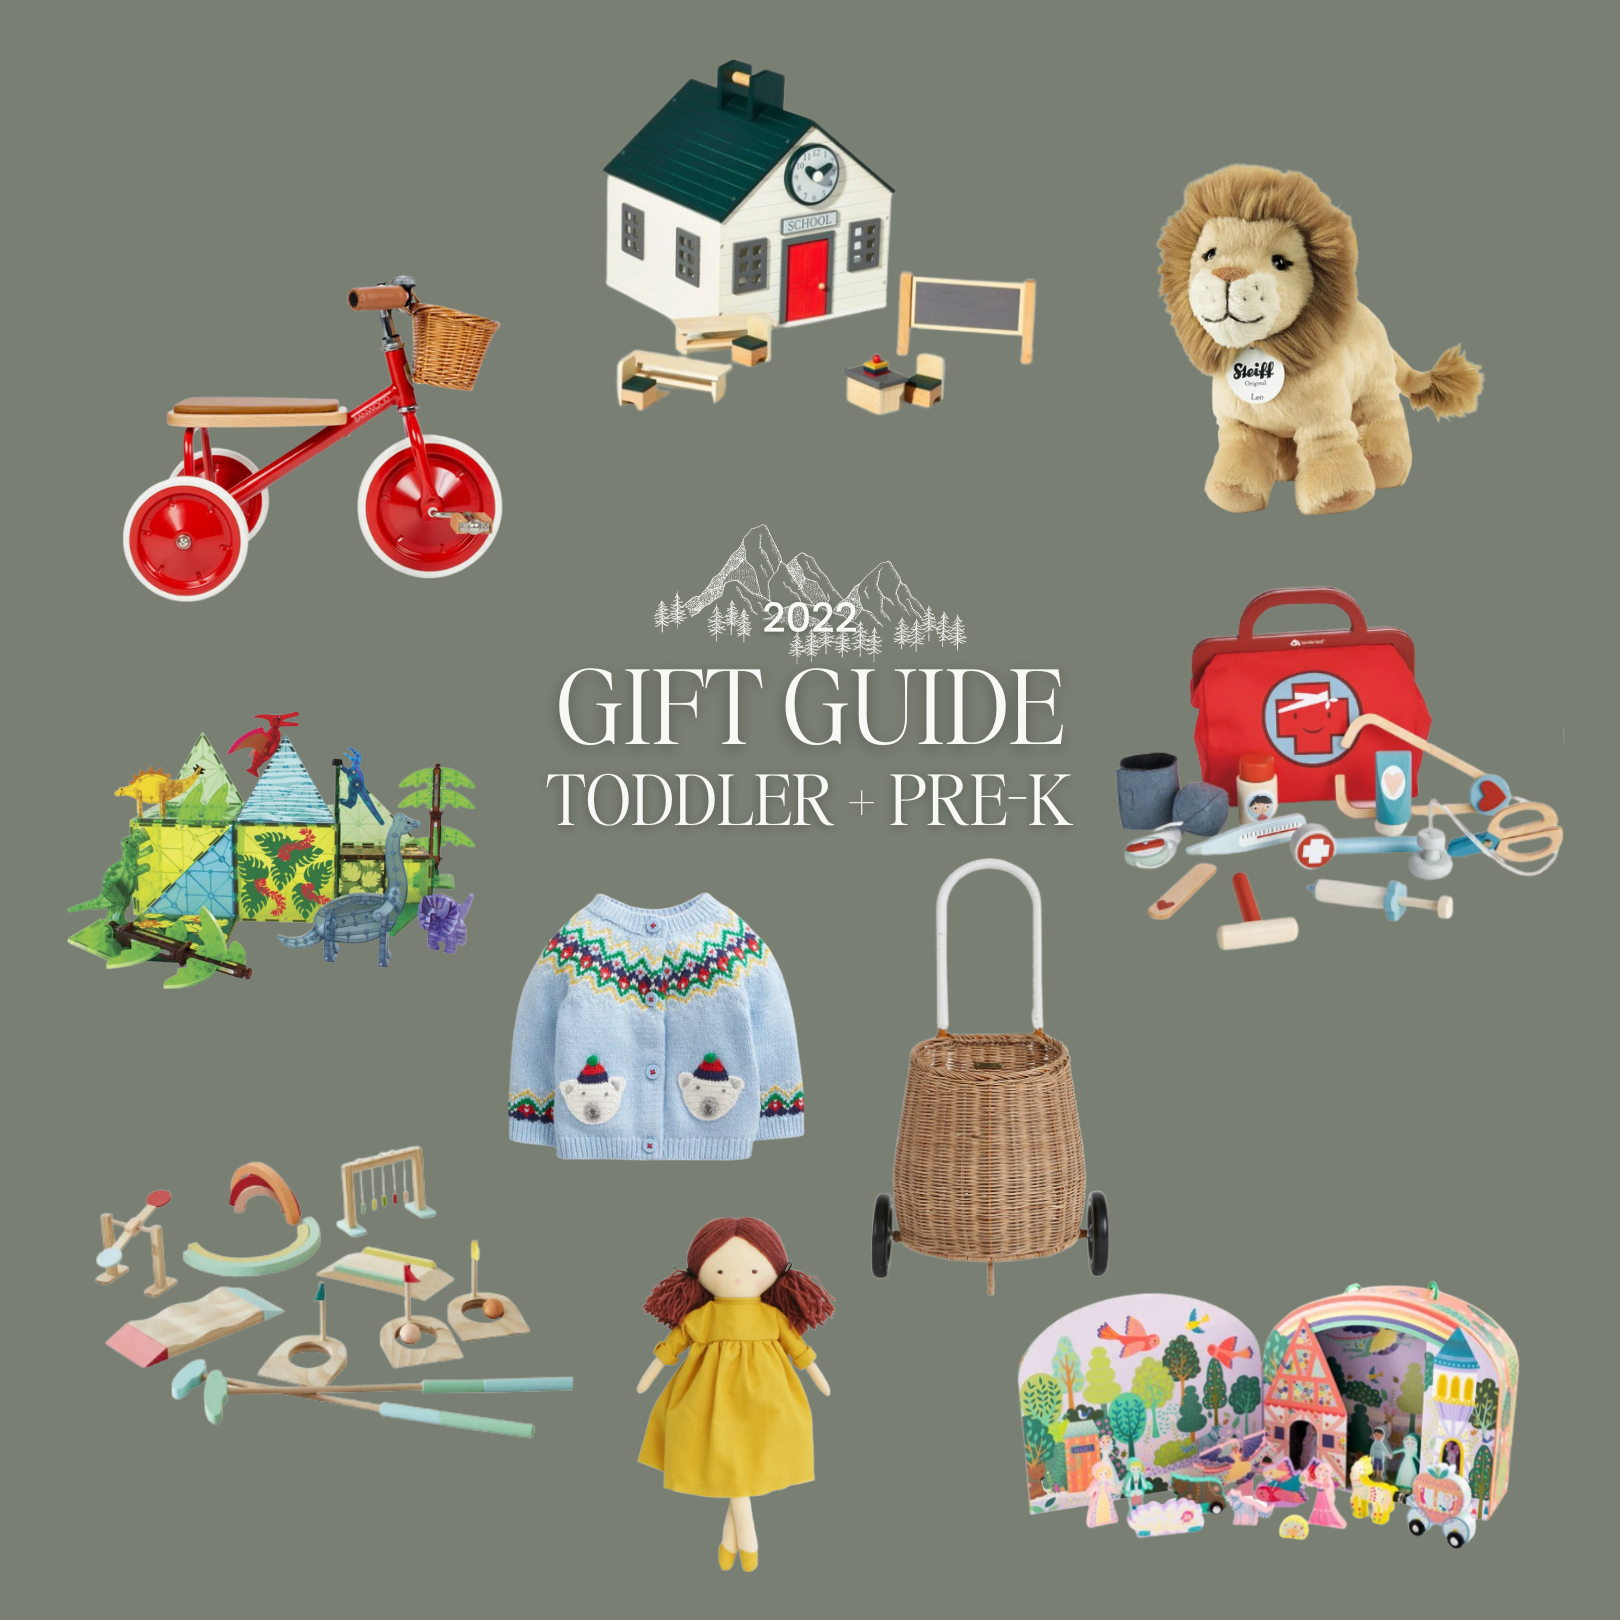 Collection of 10 gift ideas for toddlers + preschoolers